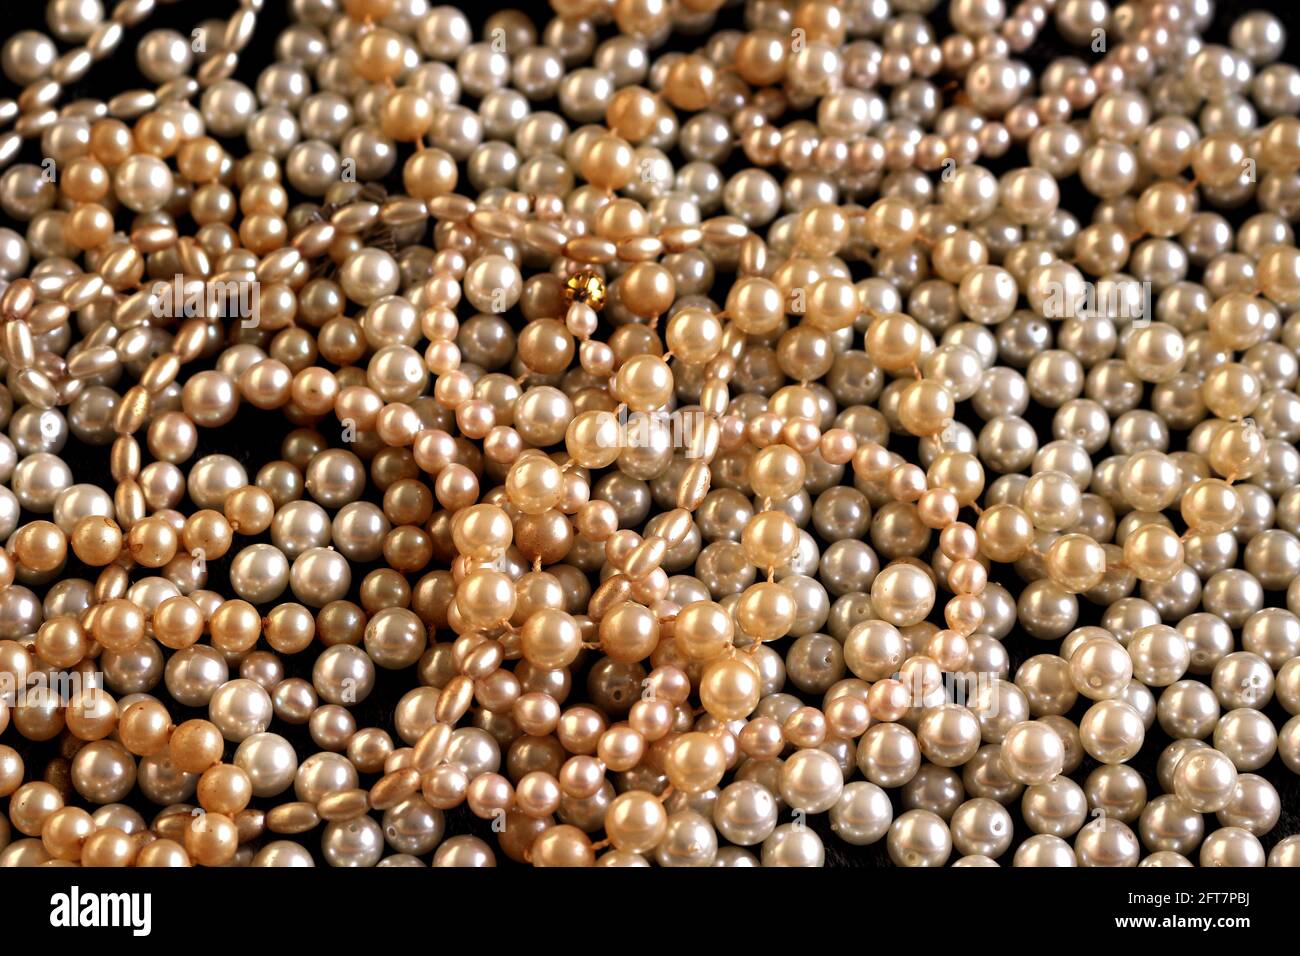 A pile of shiny pearl bead necklaces Stock Photo